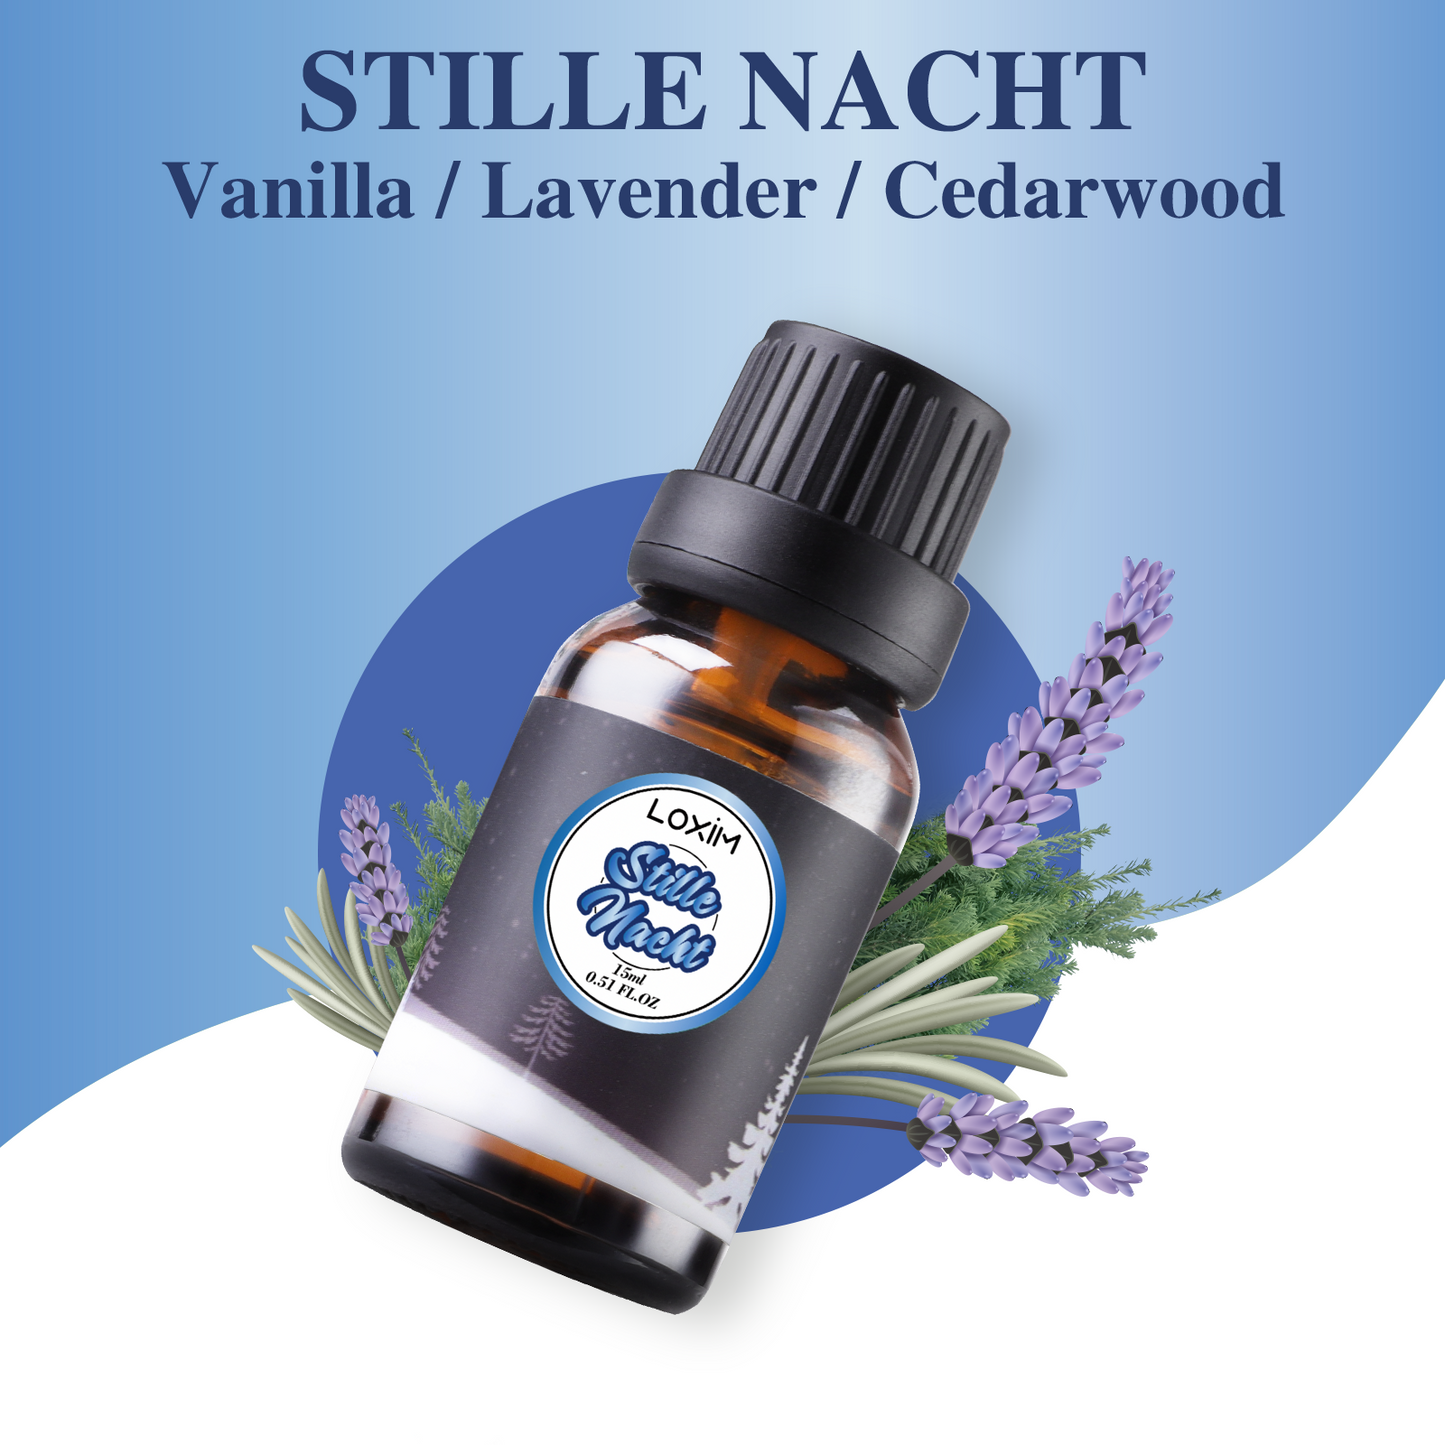 LOXIM Stille Nacht Essential Oil Blend ( Vanilla & Lavender & Cedarwood) Pure and Natural for Aromatherapy Diffuser, Skin & Hair Care, Stress Relief, Relaxation, Sleep 15ml,0.51 FL.OZ.